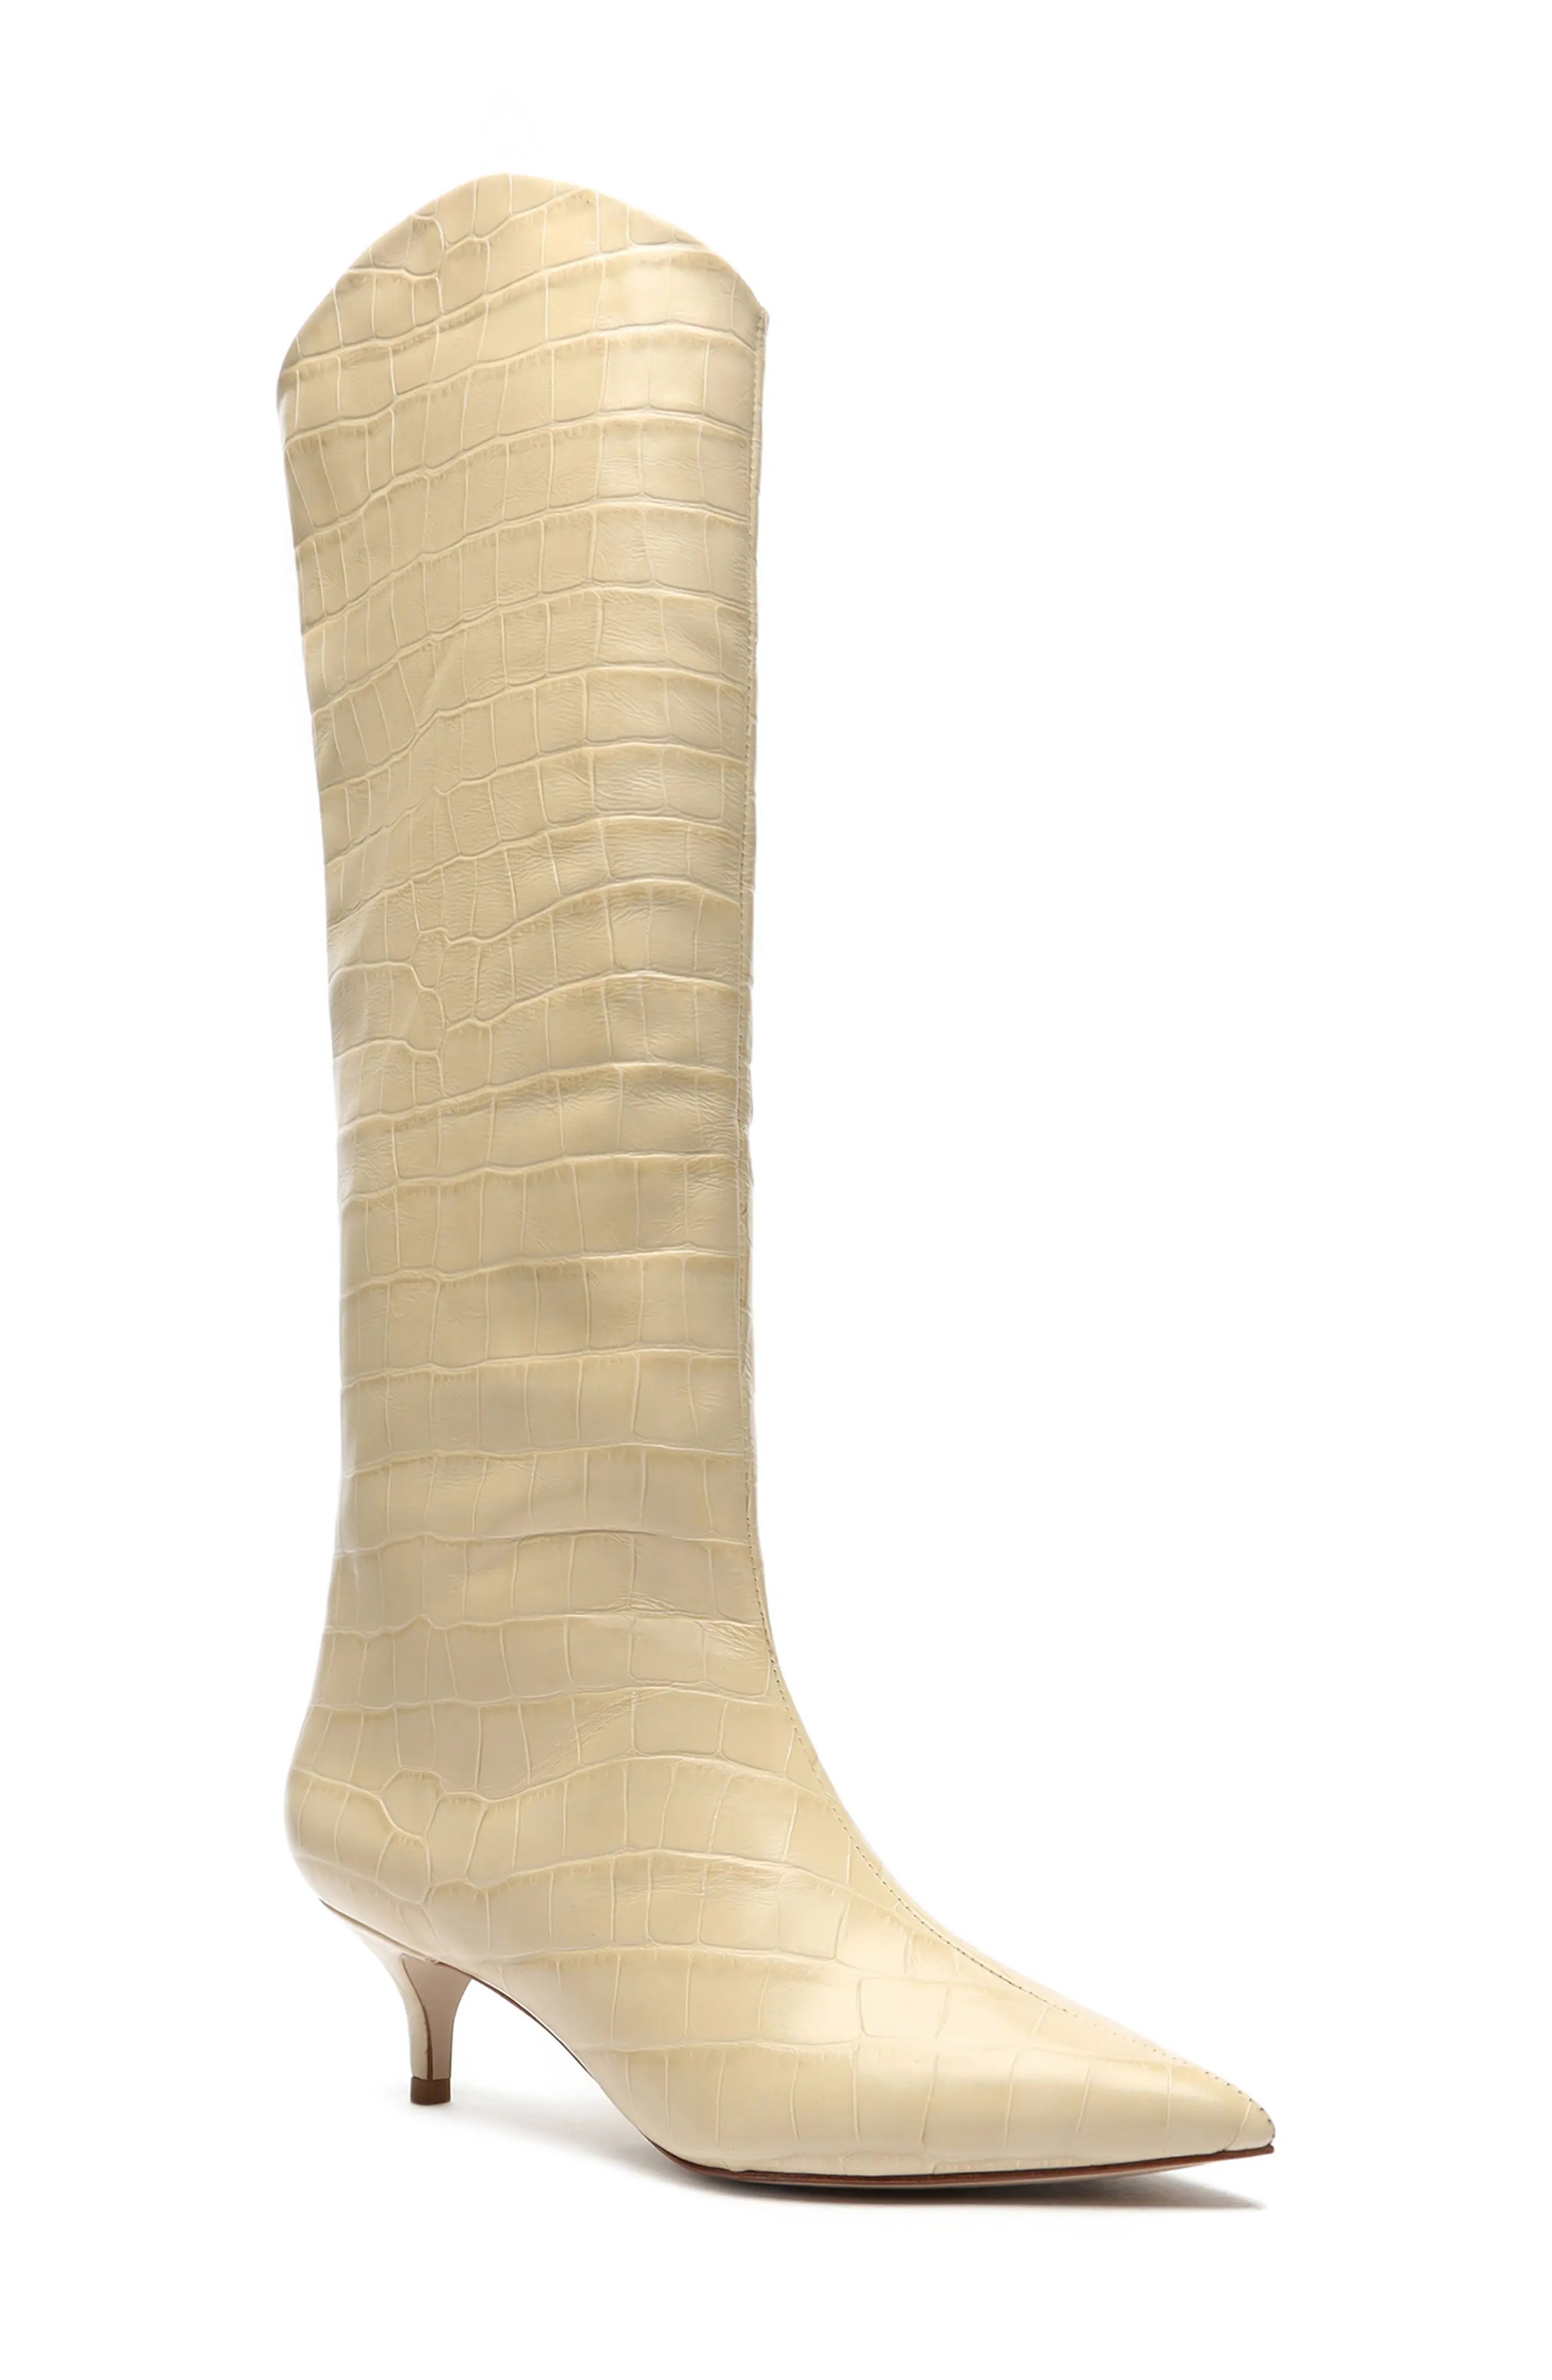 Schutz Abbey Knee High Boot in Almond Buff Leather at Nordstrom, Size 8.5 | Nordstrom